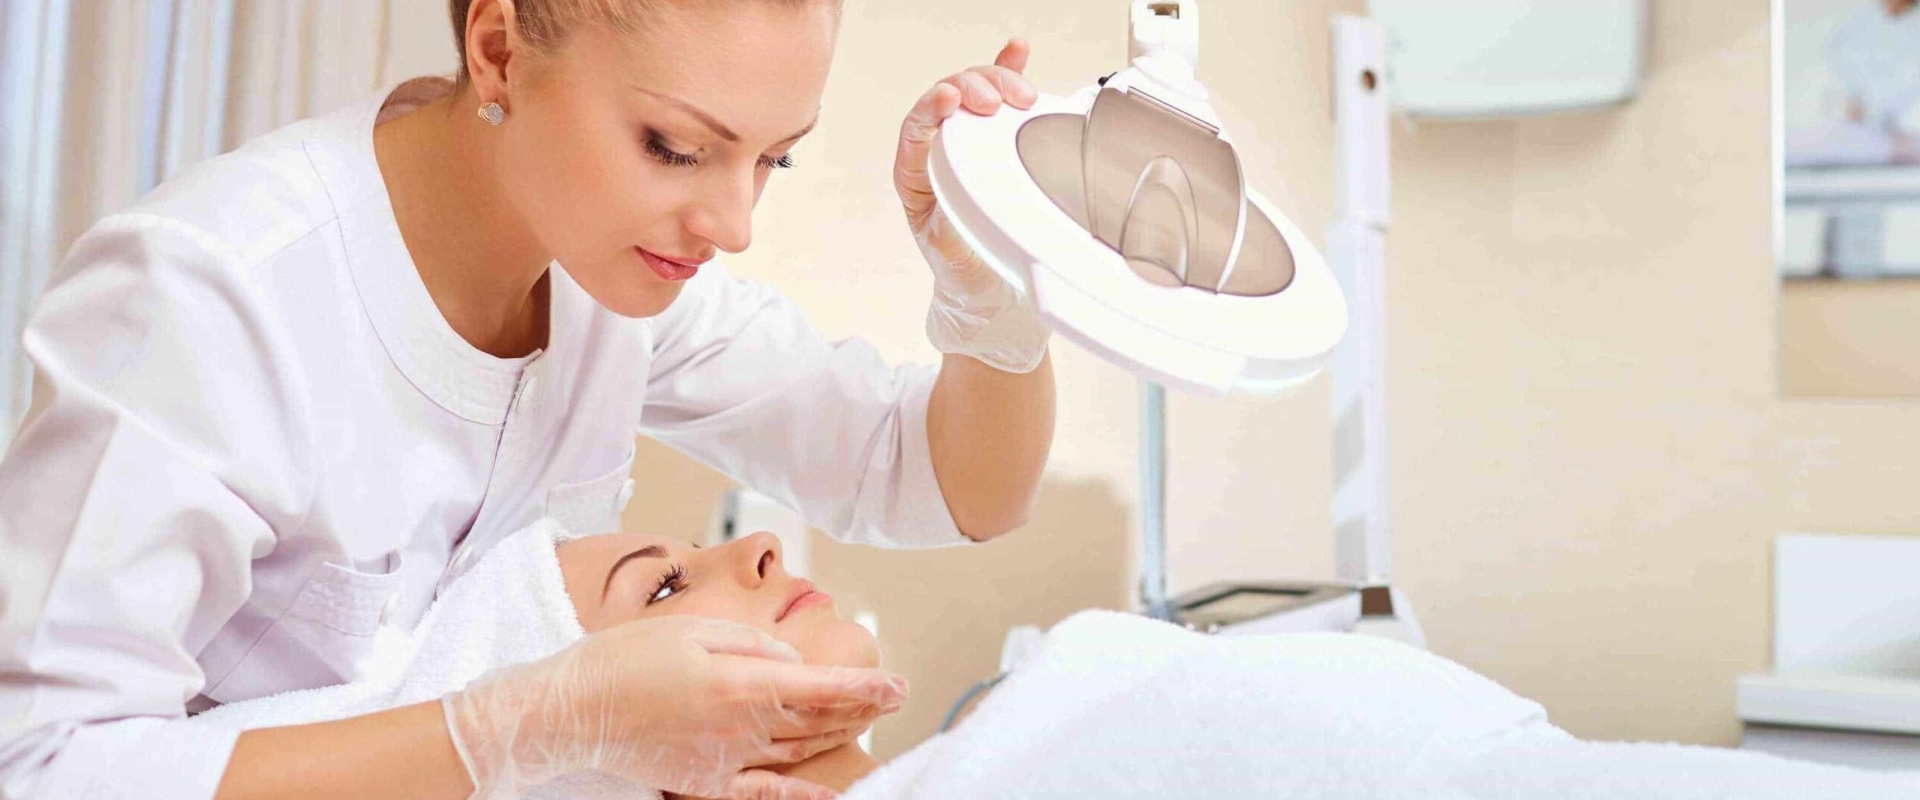 What are the average income and profit margin for medical spas?